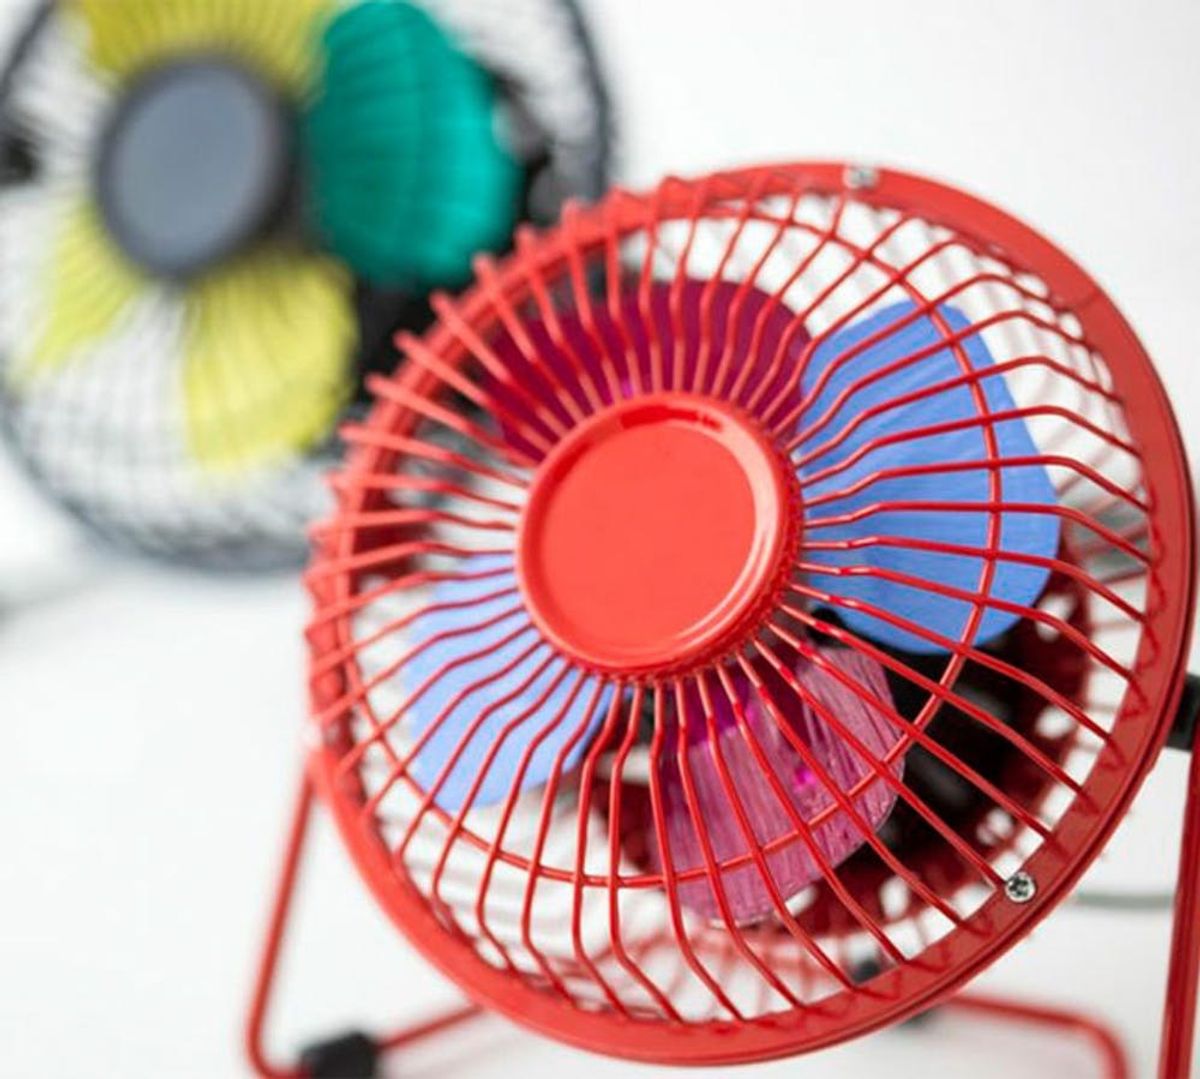 What Happens When You Make a Color Blocked Fan Spin?